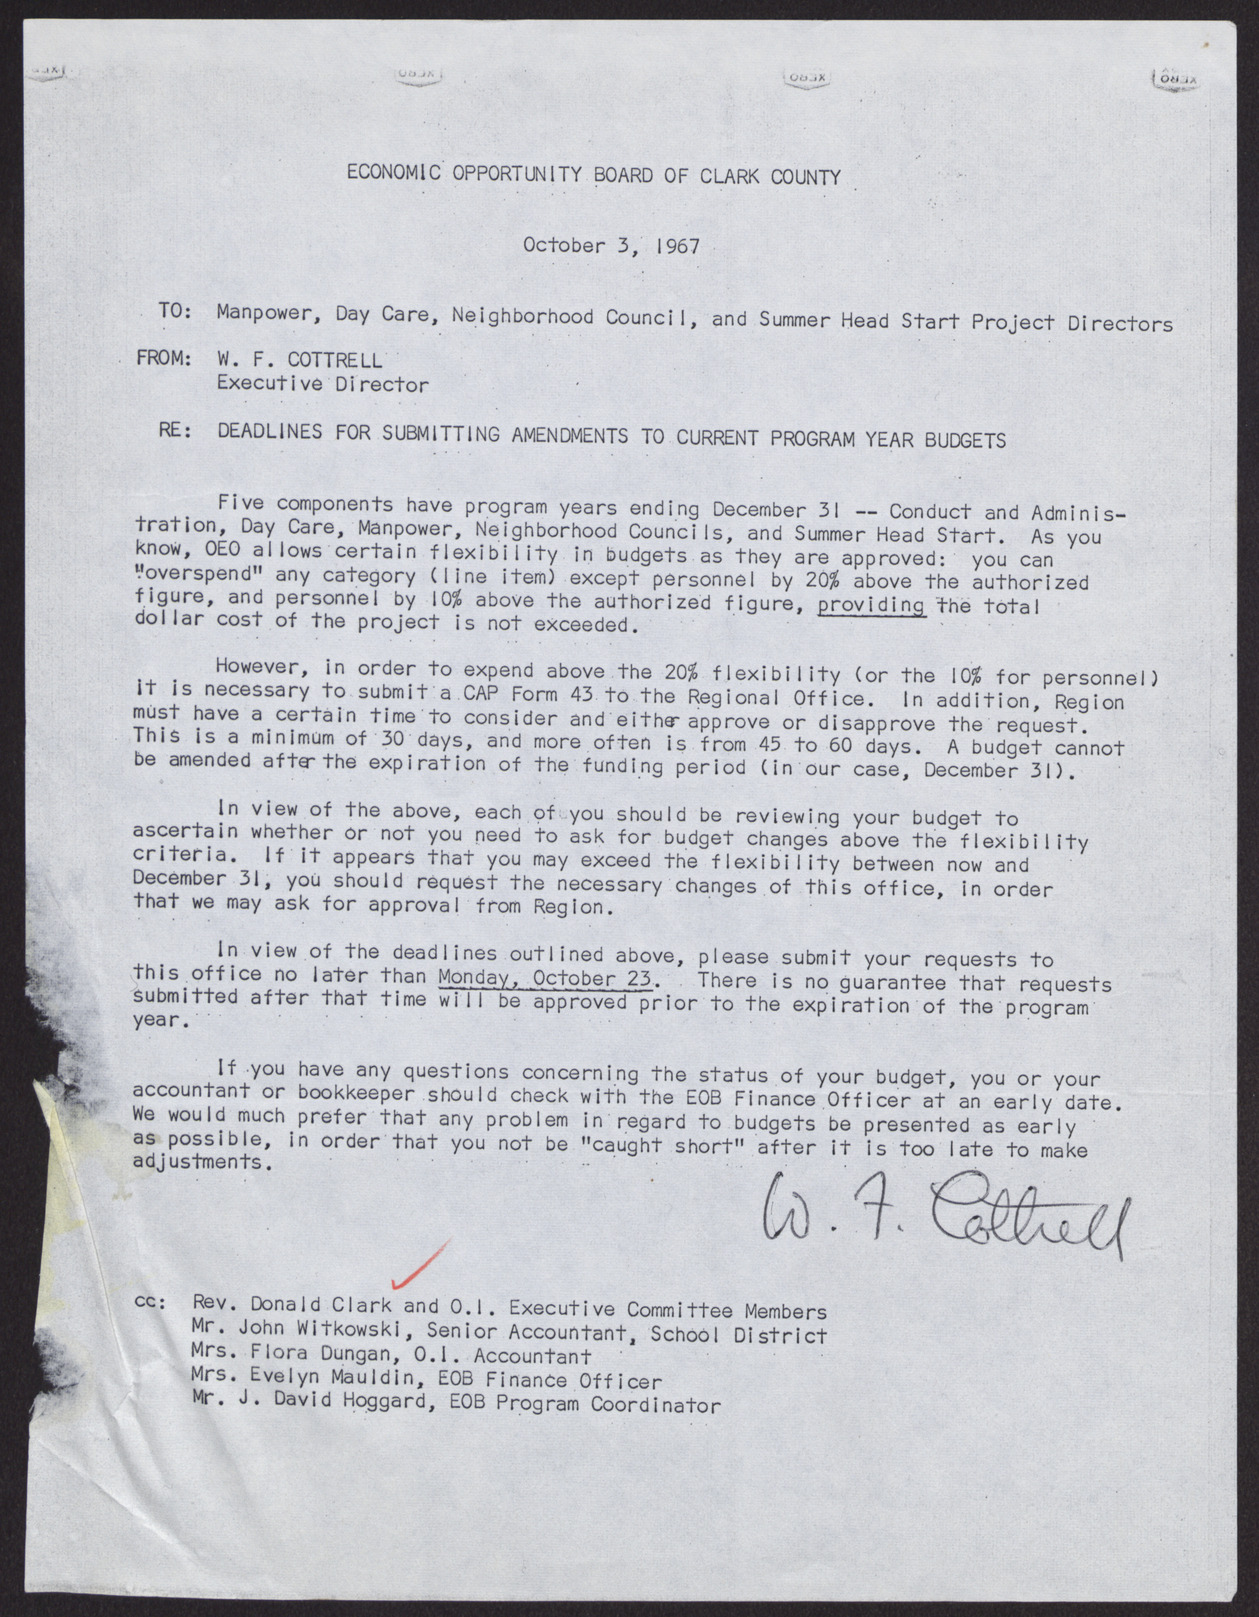 Letter to Manpower, Day Care, Neighborhood Council, and Summer Head Start Project Directors from W. F. Cottrell, October 3, 1967